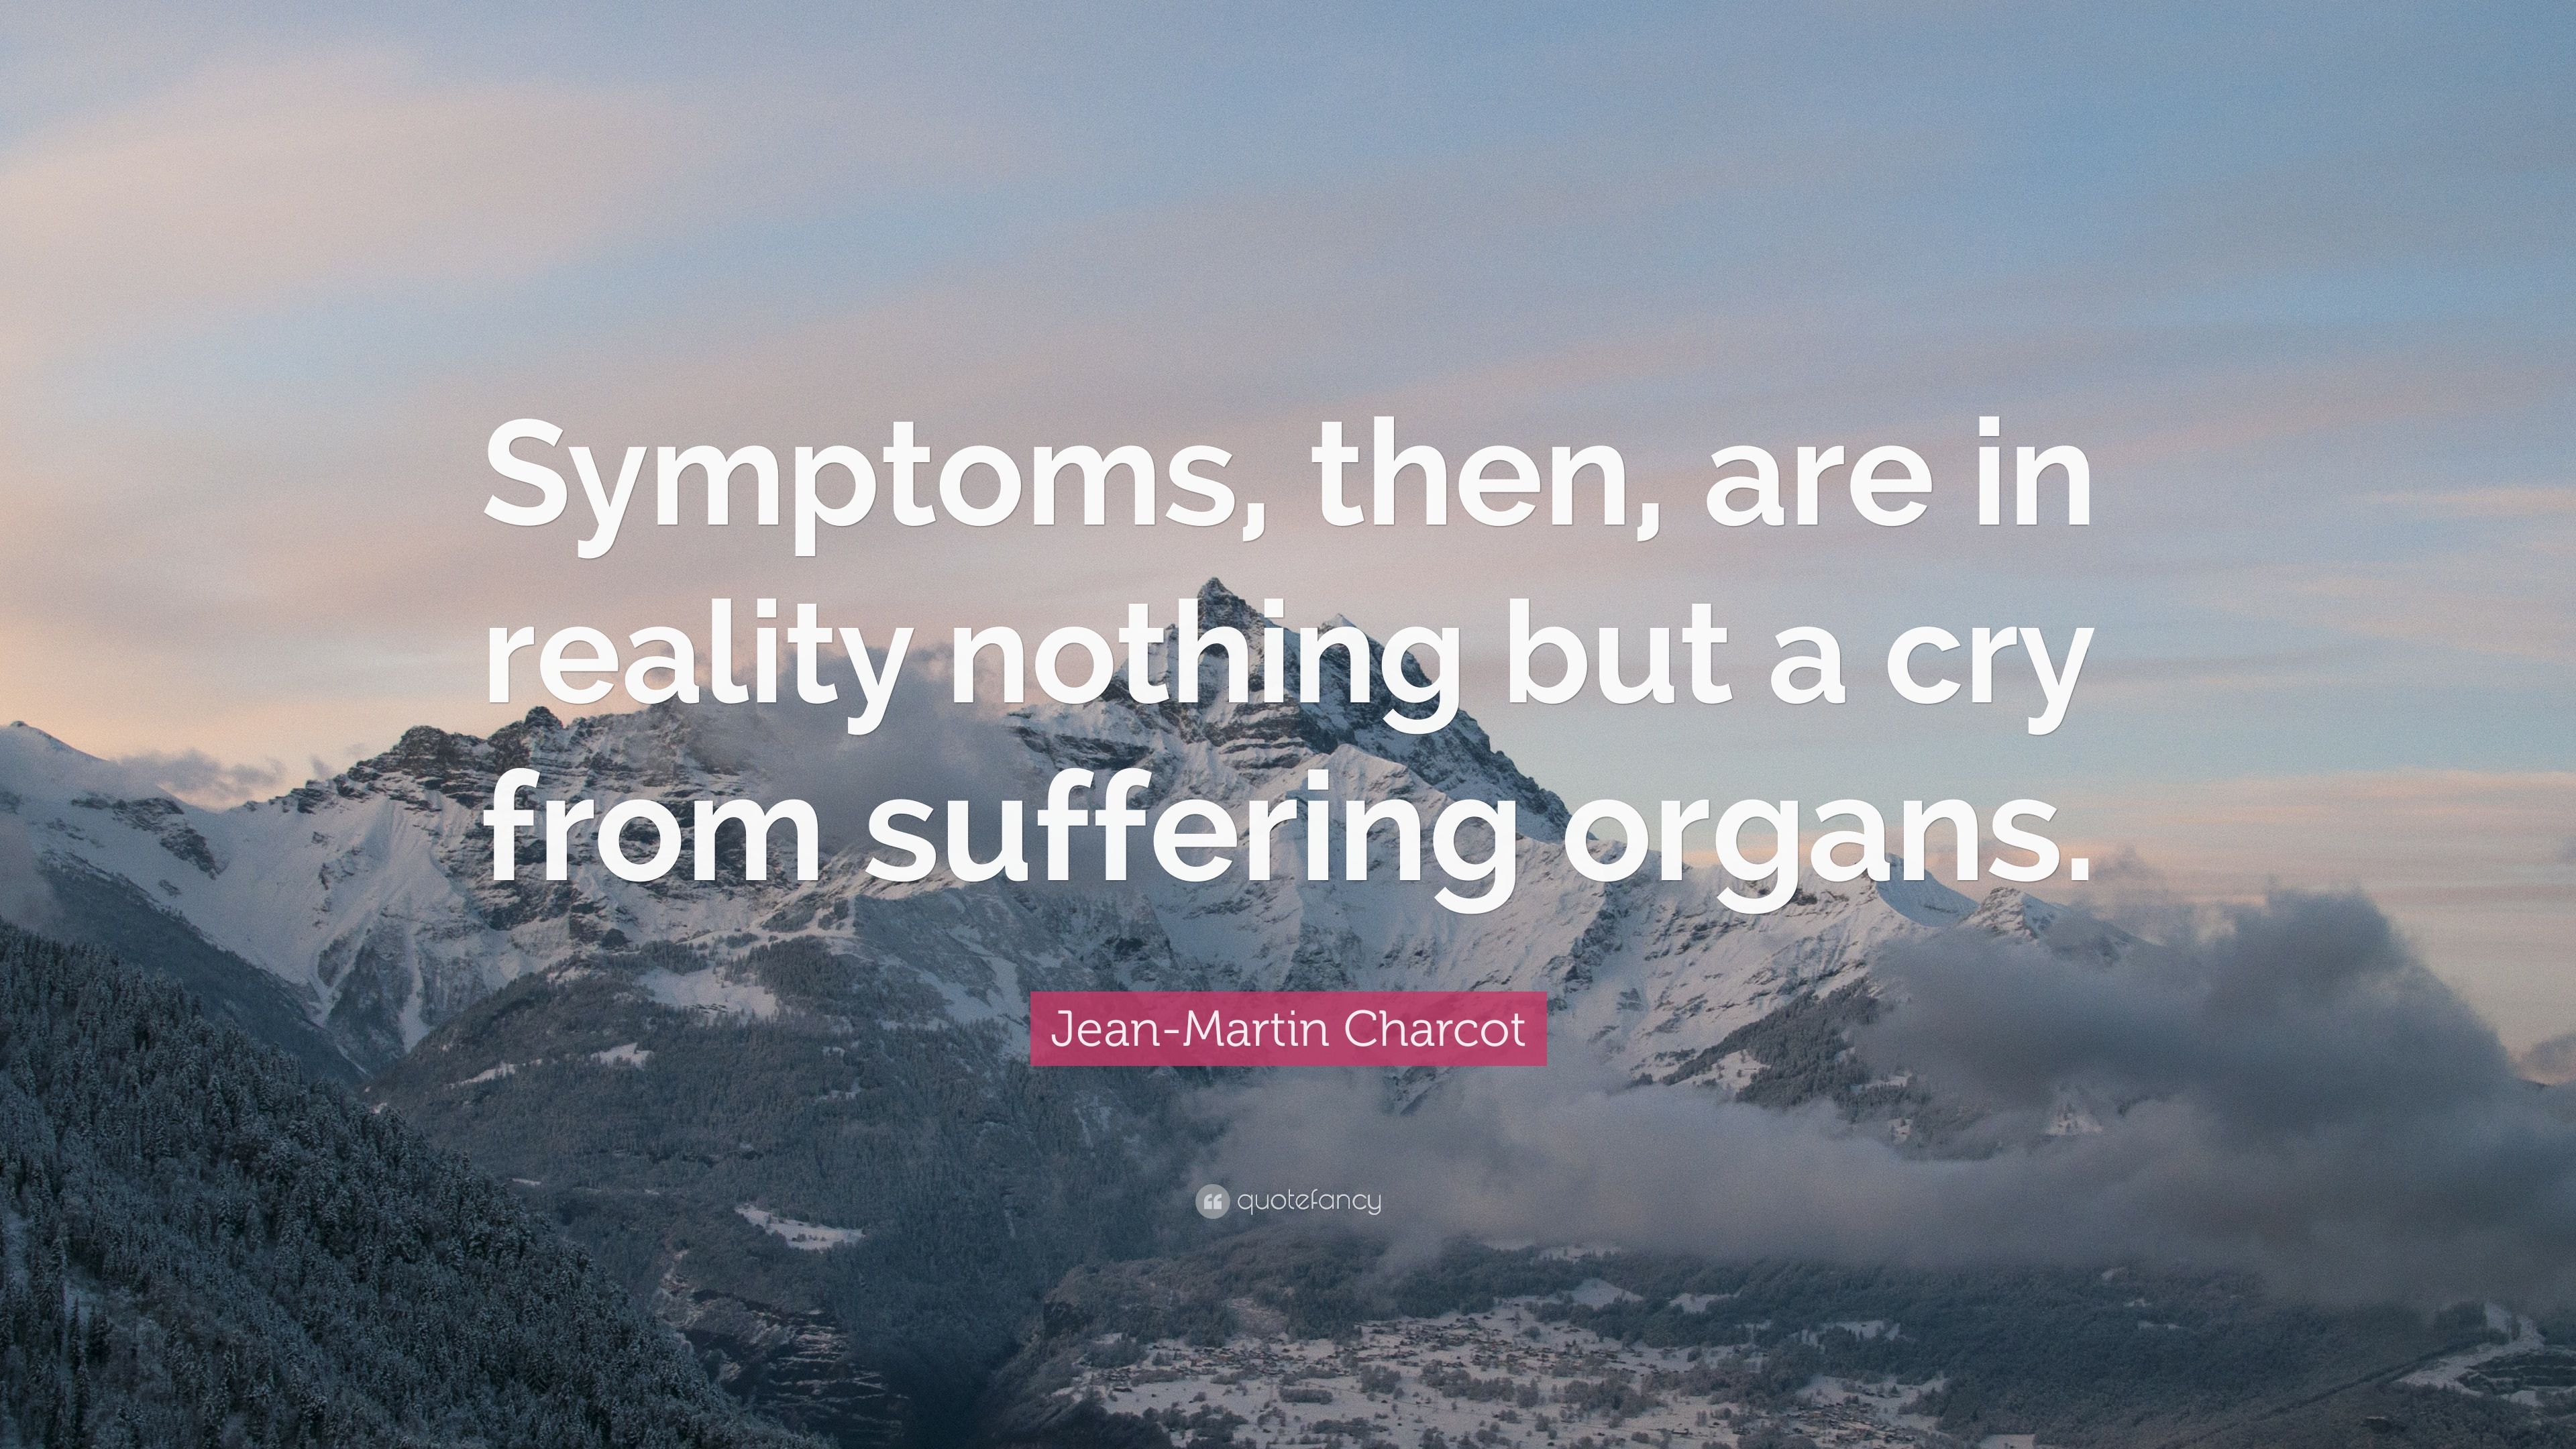 Jean Martin Charcot Quote: “Symptoms, Then, Are In Reality Nothing